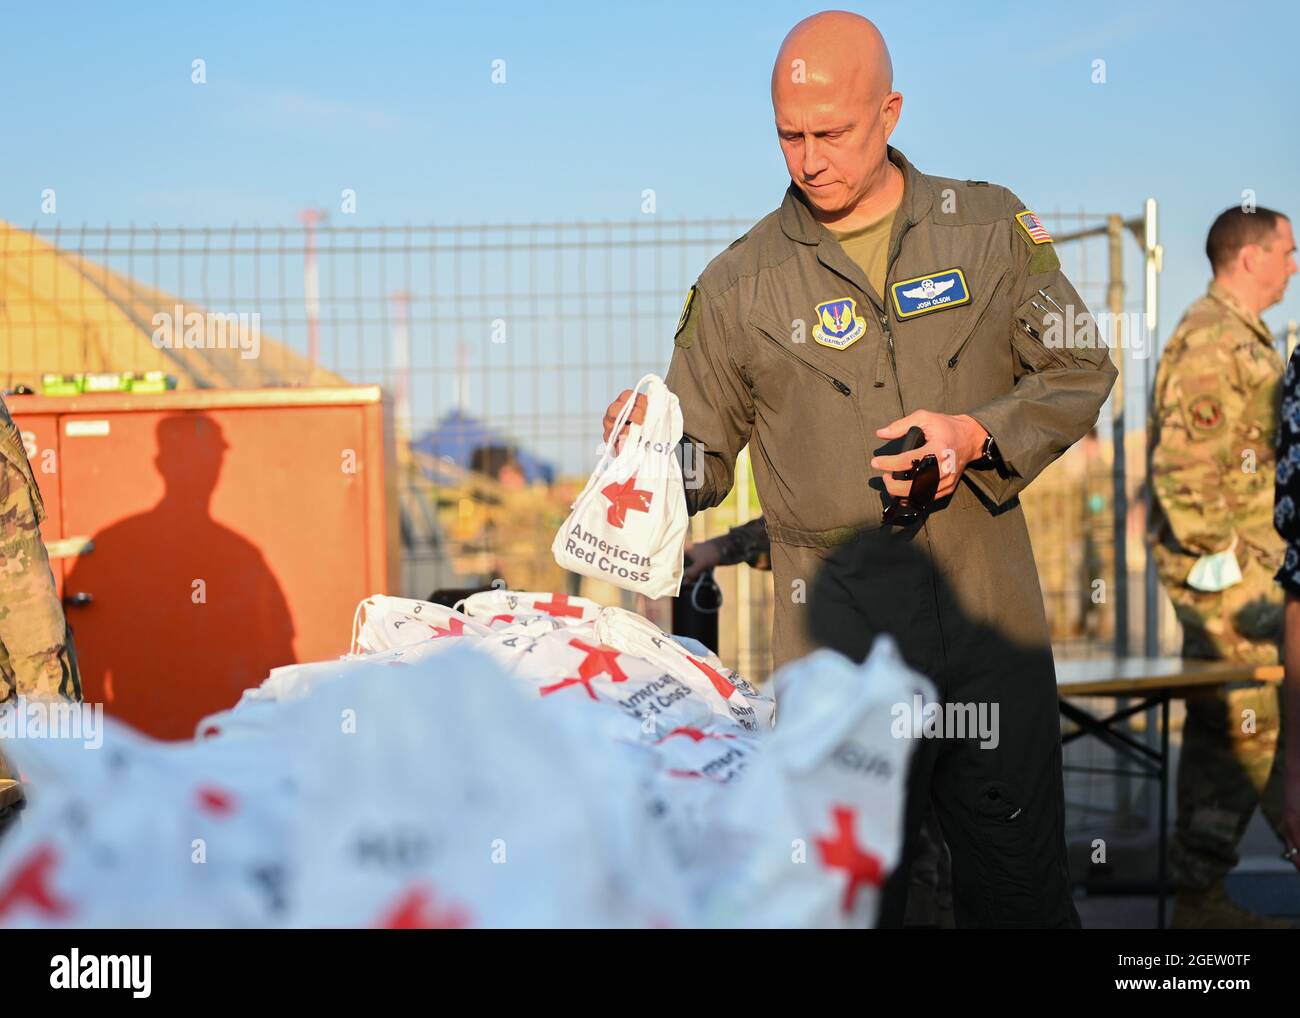 U.S. Air Force Brig. Gen. Josh Olson, 86th Airlift Wing commander, holds a comfort kit provided by the American Red Cross at Ramstein Air Base, Germany, Aug. 20, 2021. Ramstein Air Base is providing safe, temporary lodging for qualified evacuees from Afghanistan as part of Operation Allies Refuge during the next several weeks. Operation Allies Refuge is facilitating the quick, safe evacuation of U.S. citizens, Special Immigrant Visa applicants and other at-risk Afghans from Afghanistan. Qualified evacuees will receive support, such as temporary lodging, food, medical screening and treatment an Stock Photo